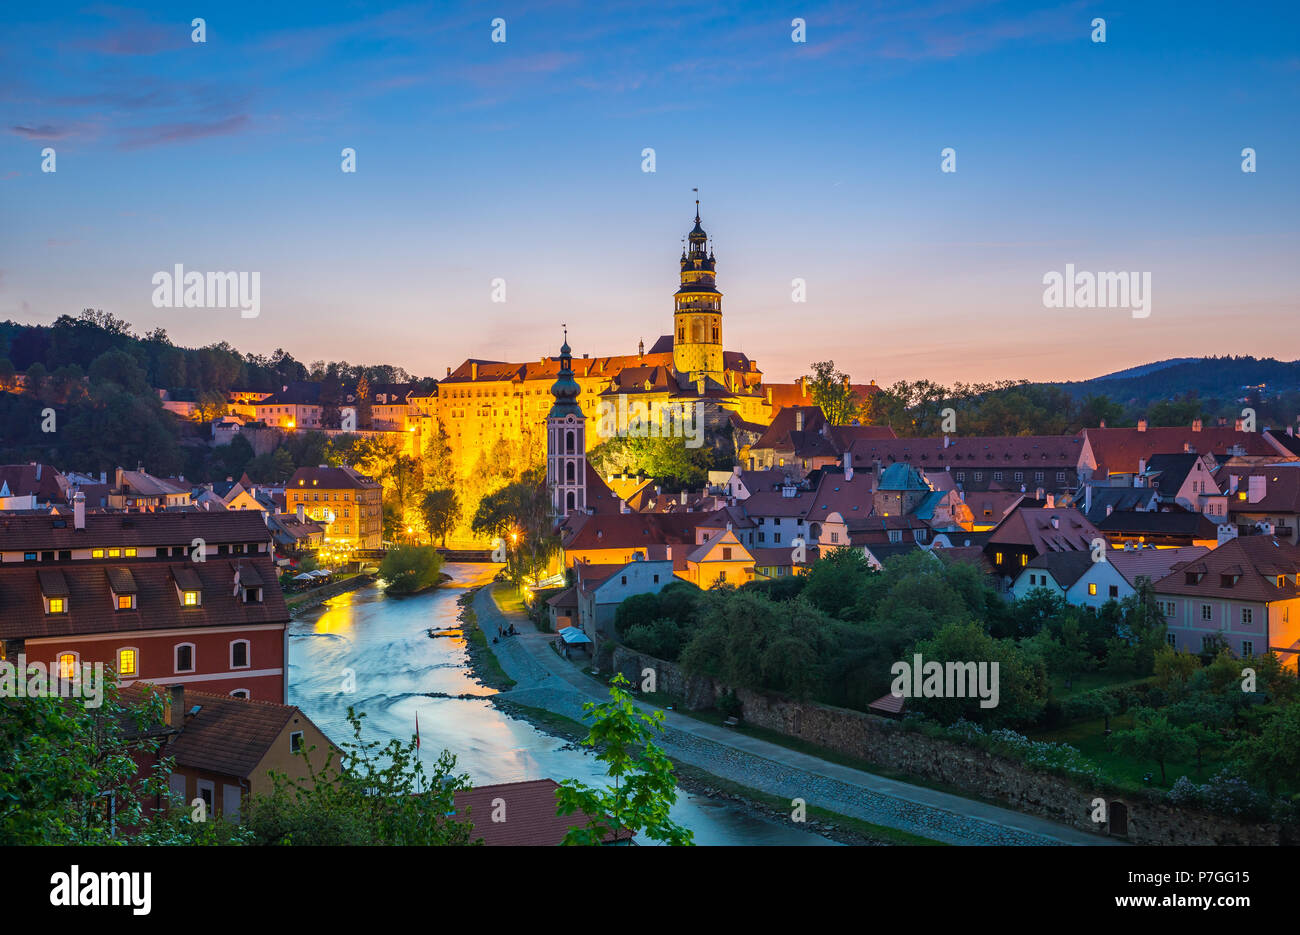 Night view of Cesky Krumlov old town in Czech Republic. Stock Photo